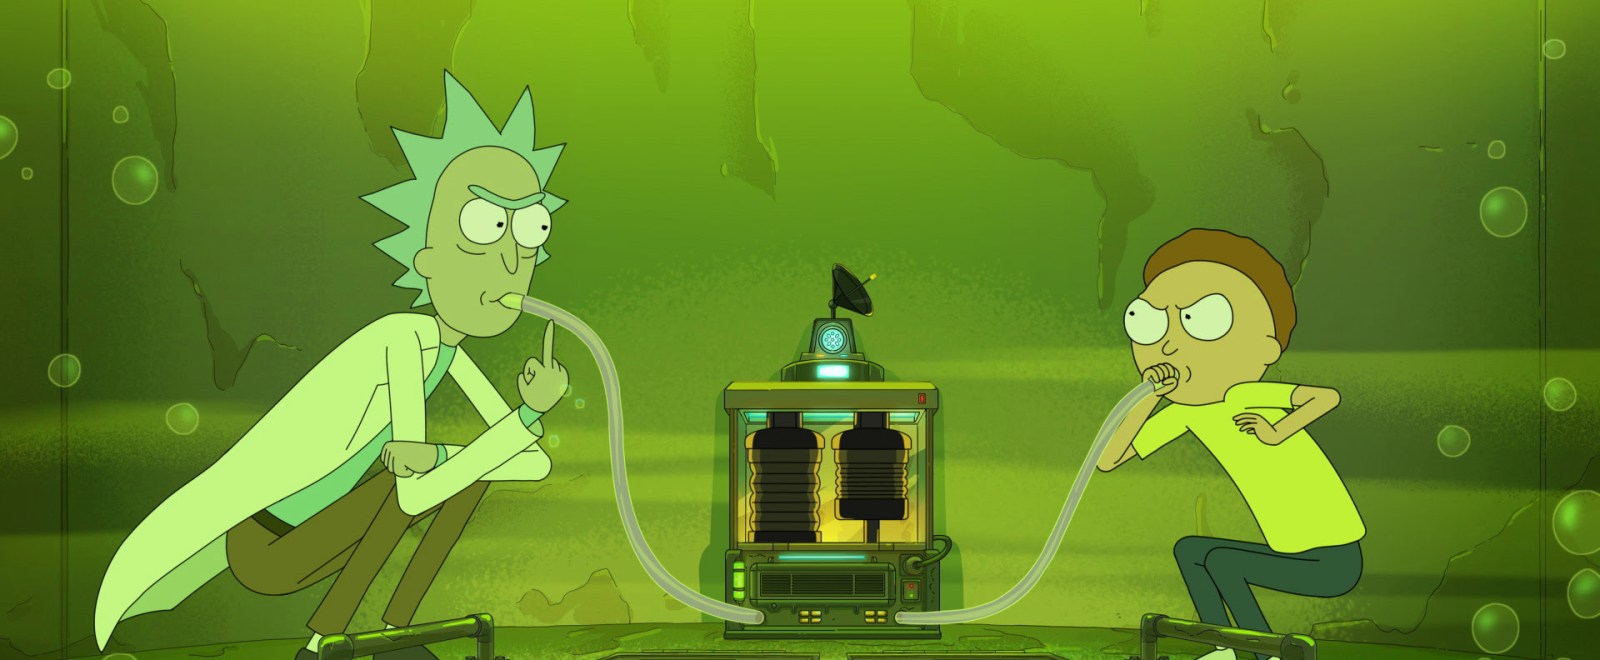 Rick And Morty S Season 5 Guest Stars Include A Community Favorite And Timothy Olyphant - brawl stars barryl raviolone